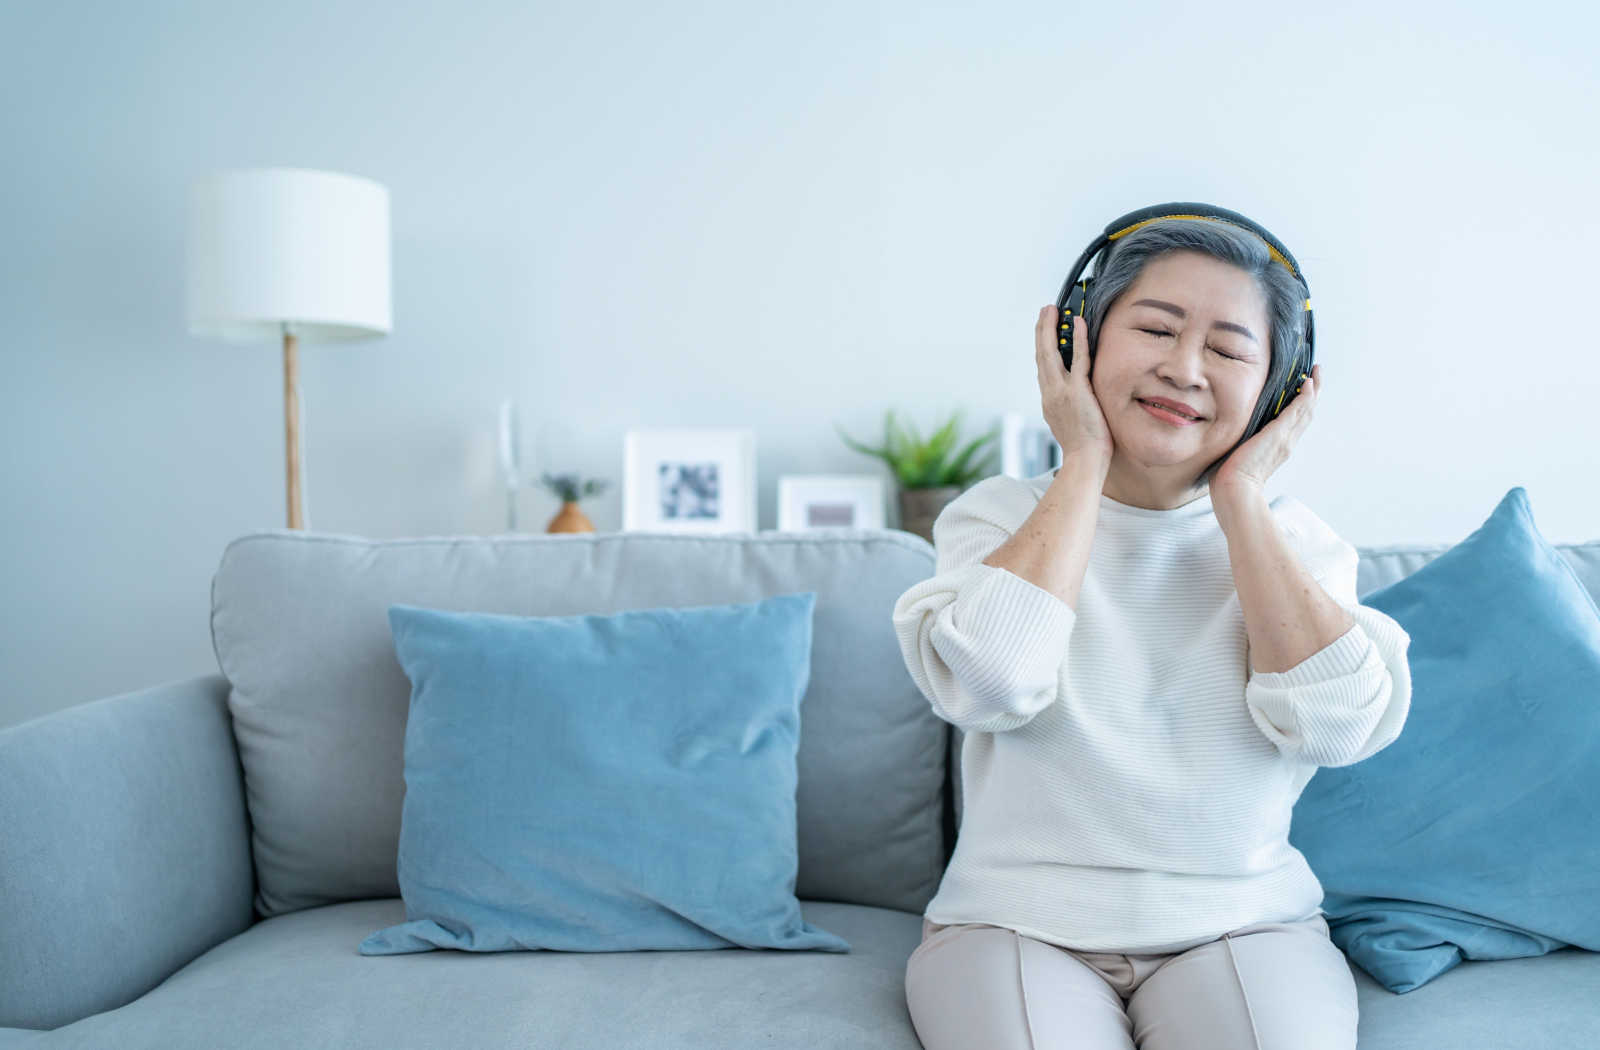 A senior woman smiling while relaxing on a couch and listening to music through wireless headphones.